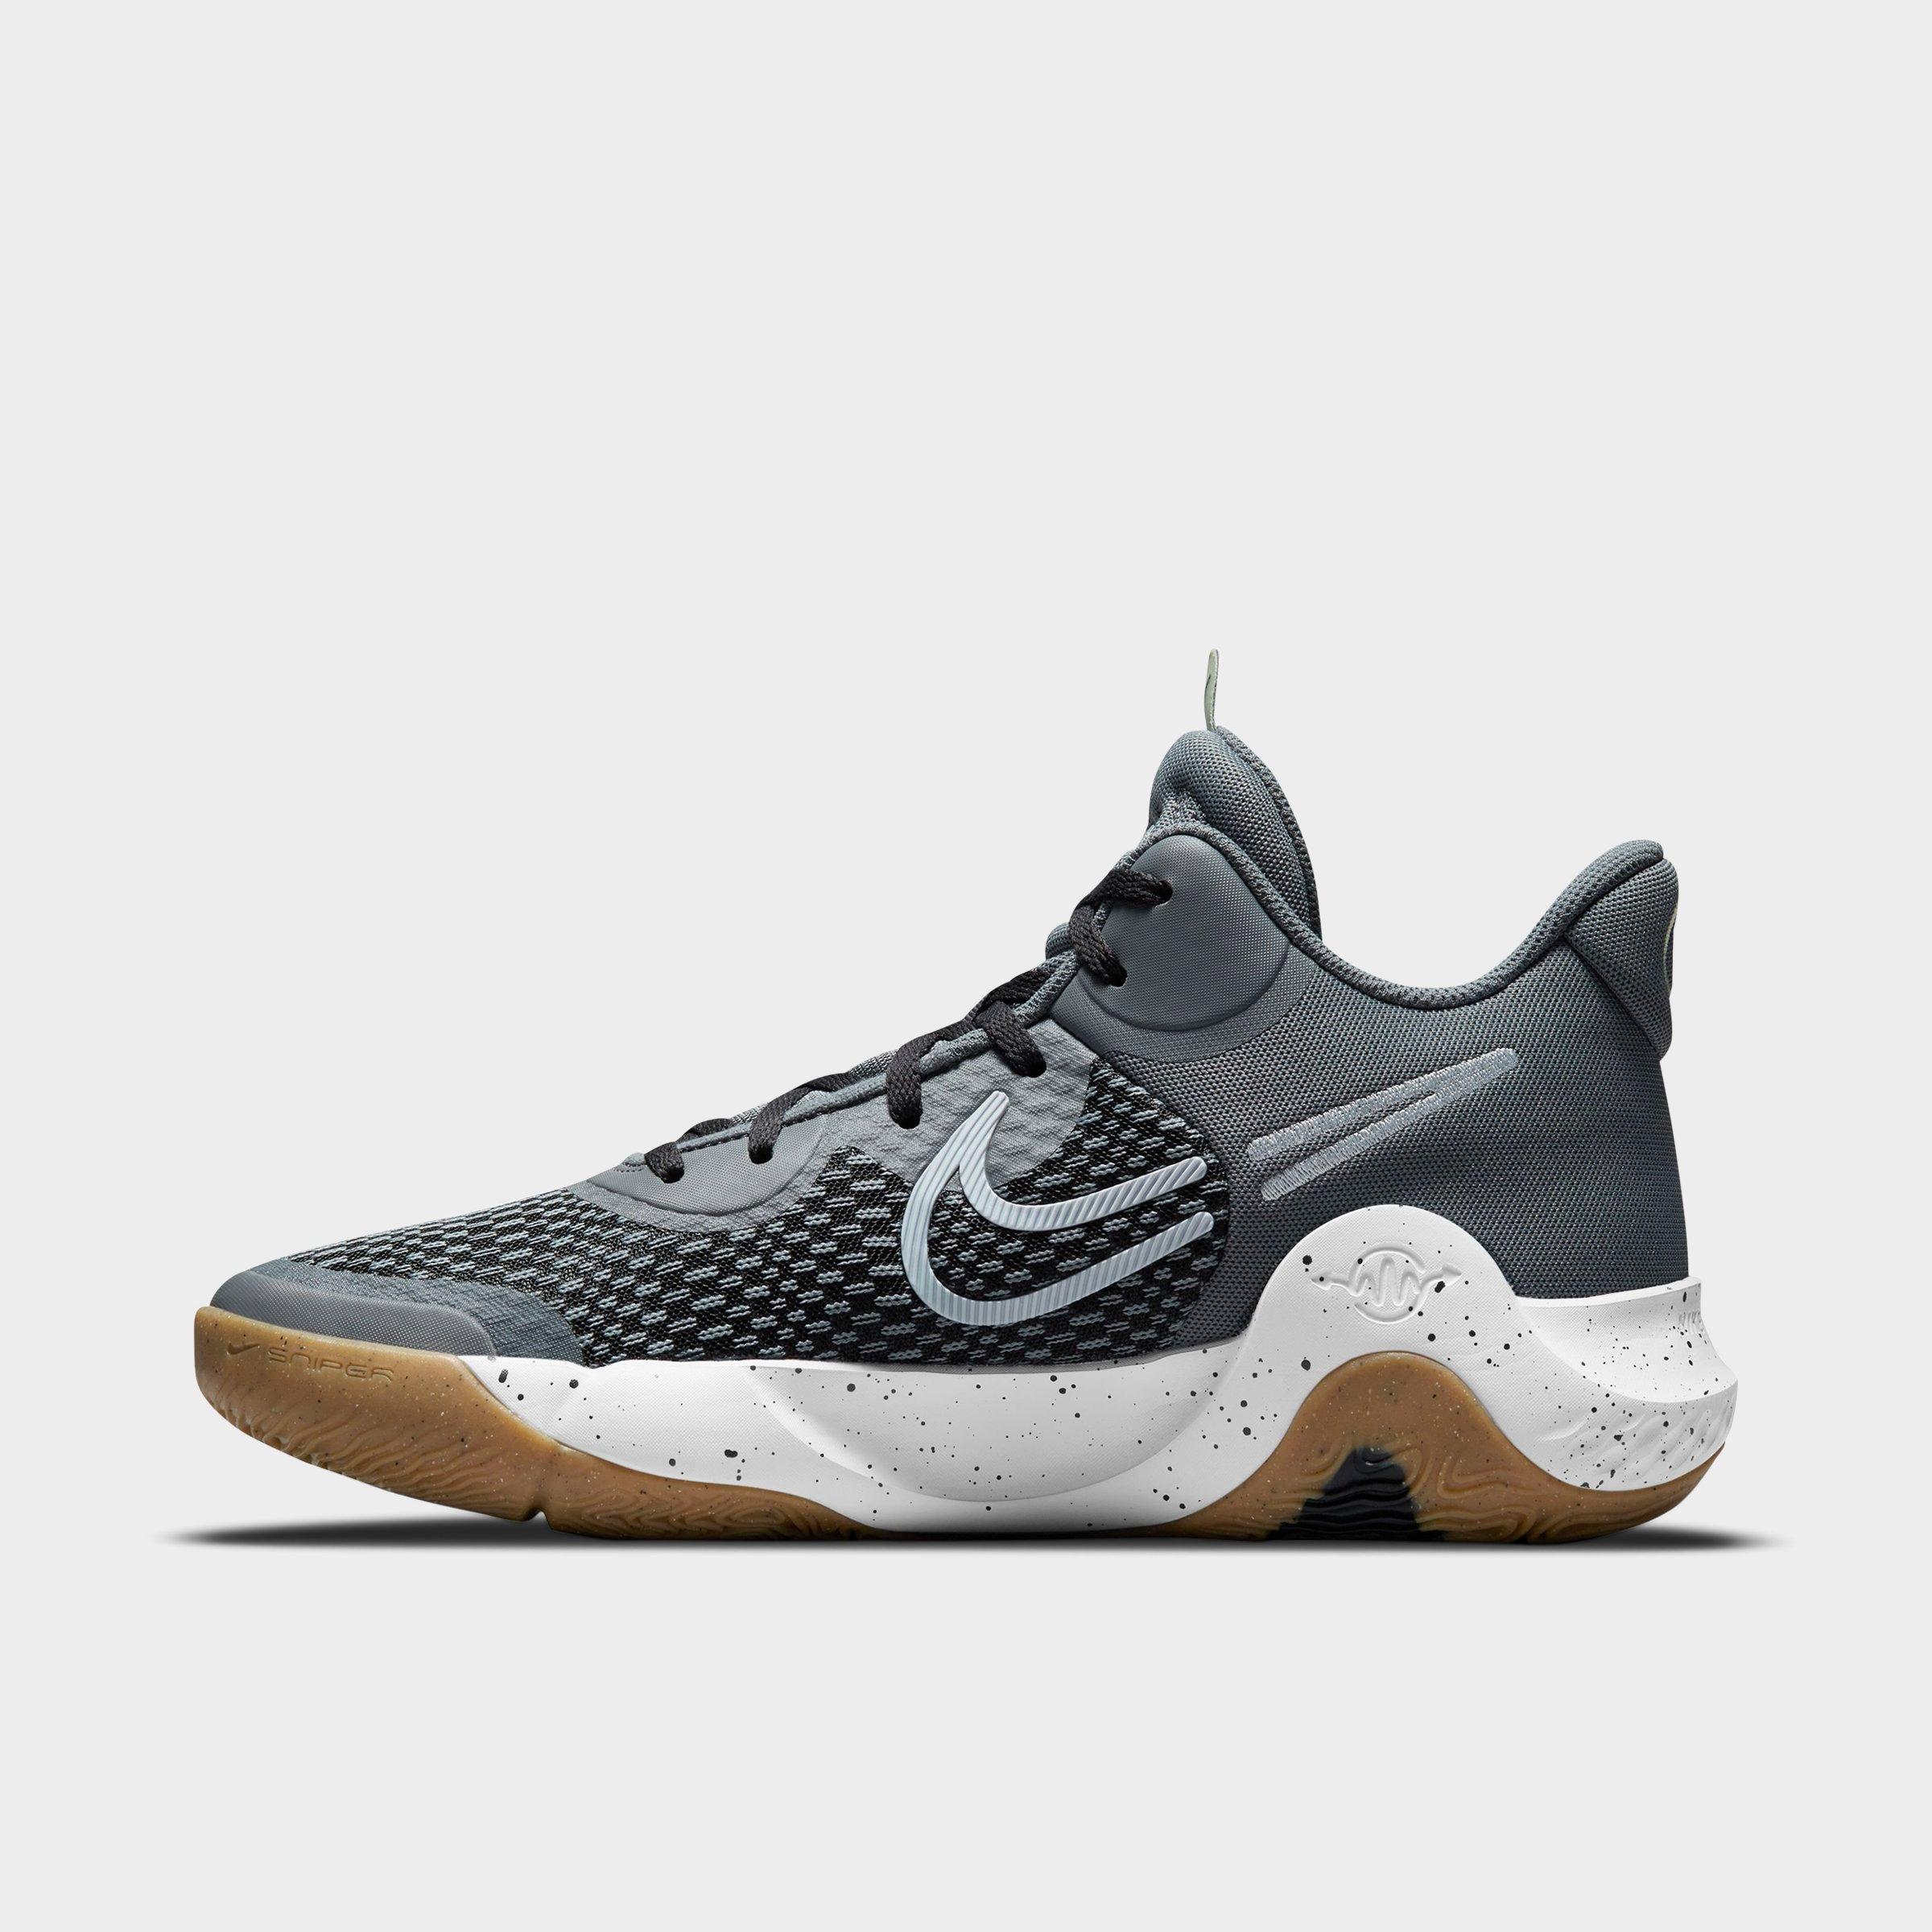 men's kd trey 5 vi basketball sneakers from finish line